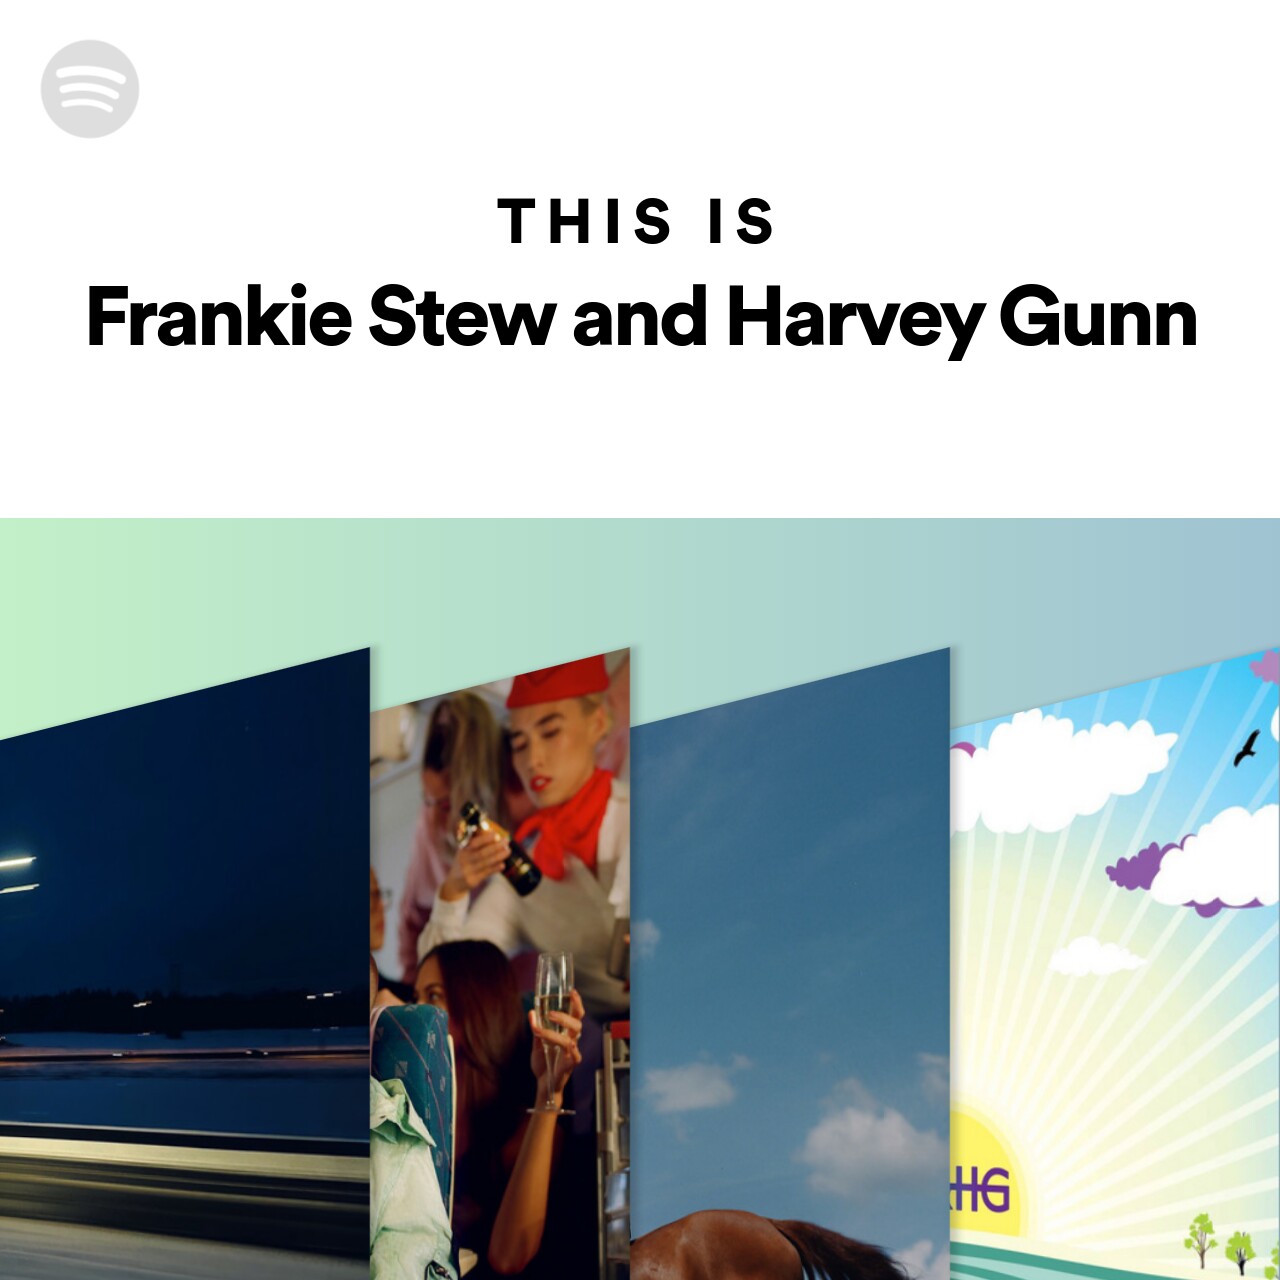 This Is Frankie Stew and Harvey Gunn